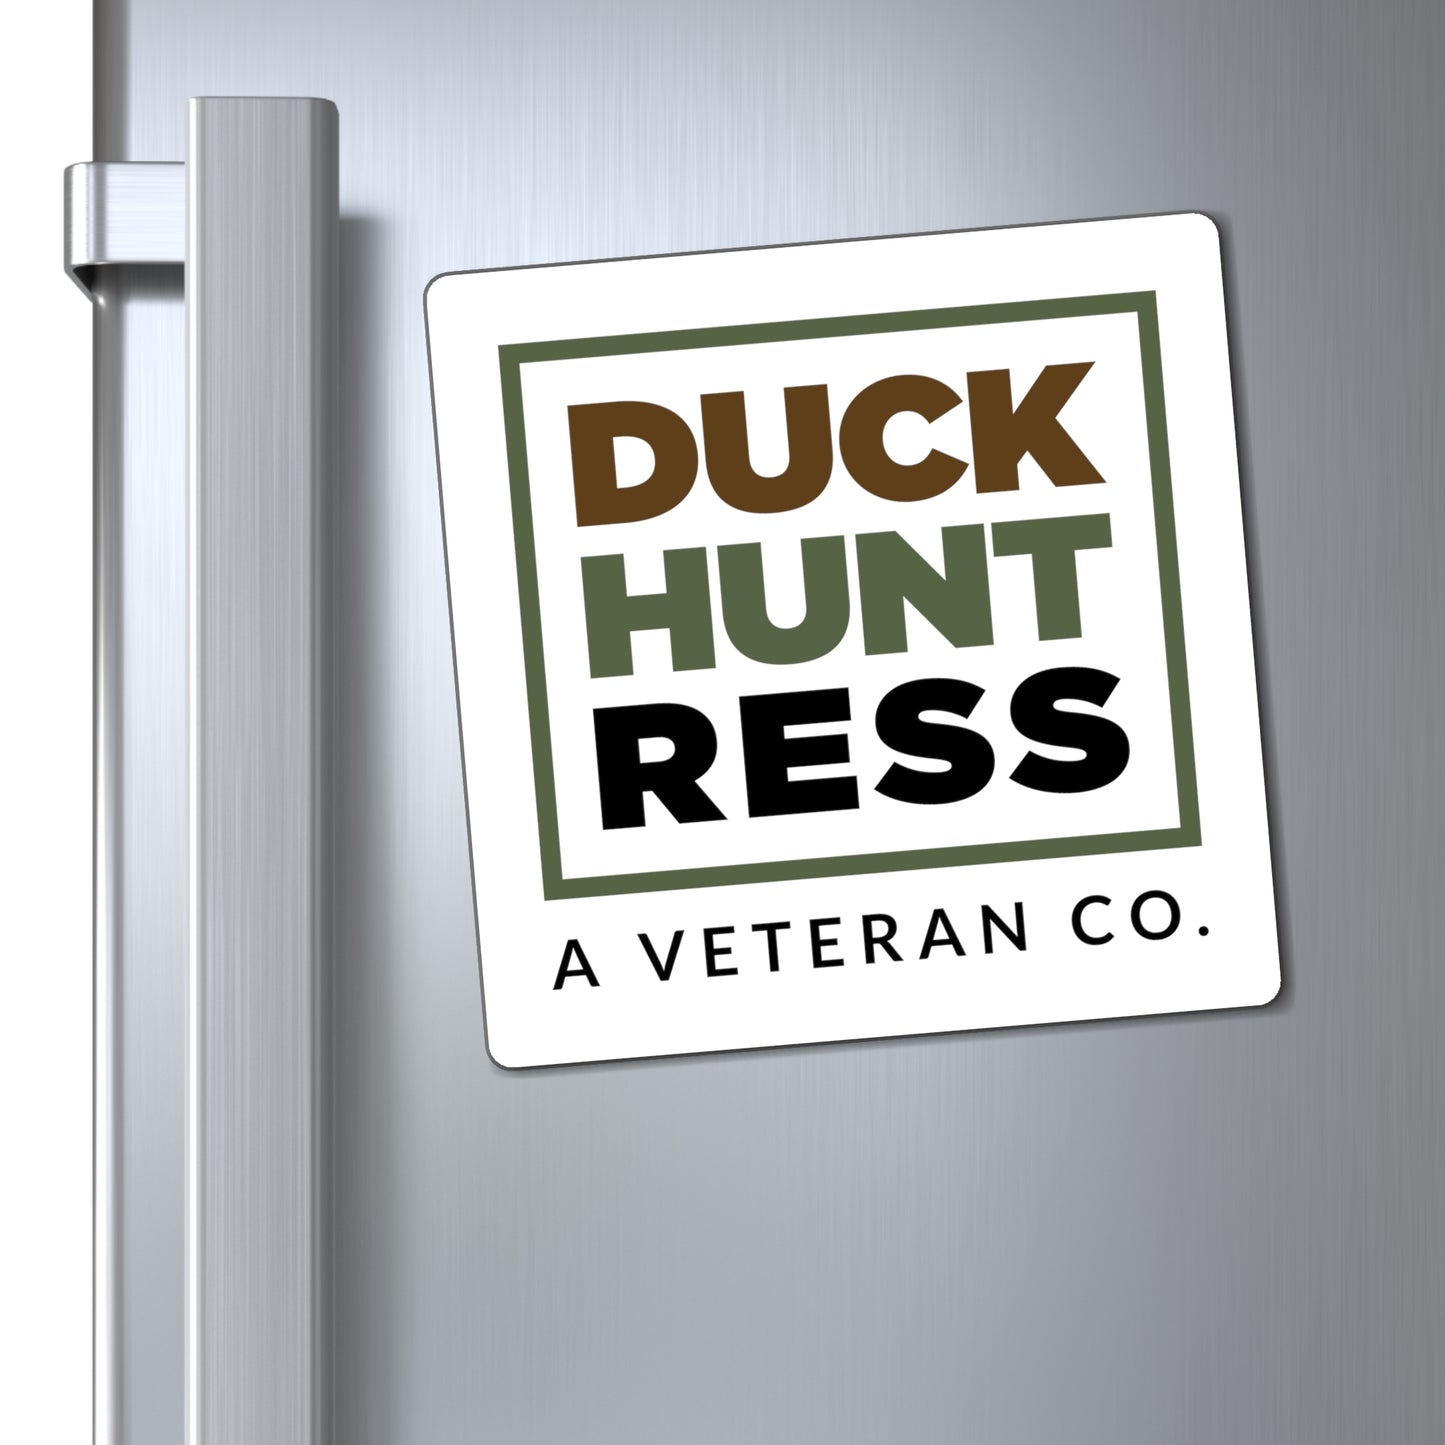 DUCK HUNTRESS Magnet (3 Size Options)